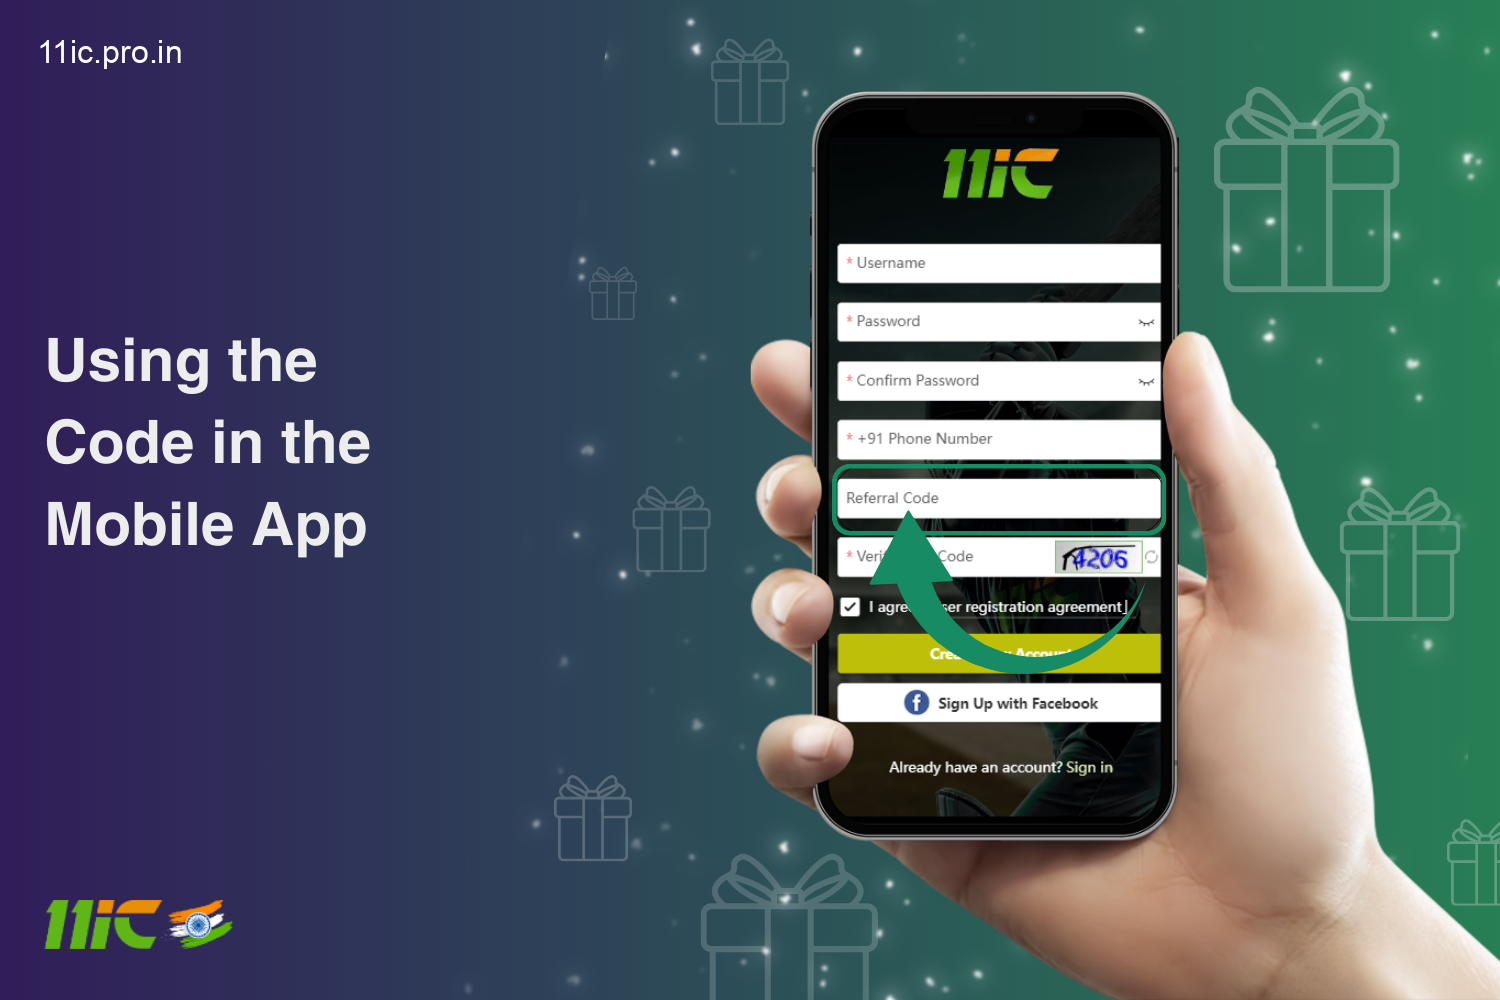 Indian users can use promo code 11ic on the branded mobile app